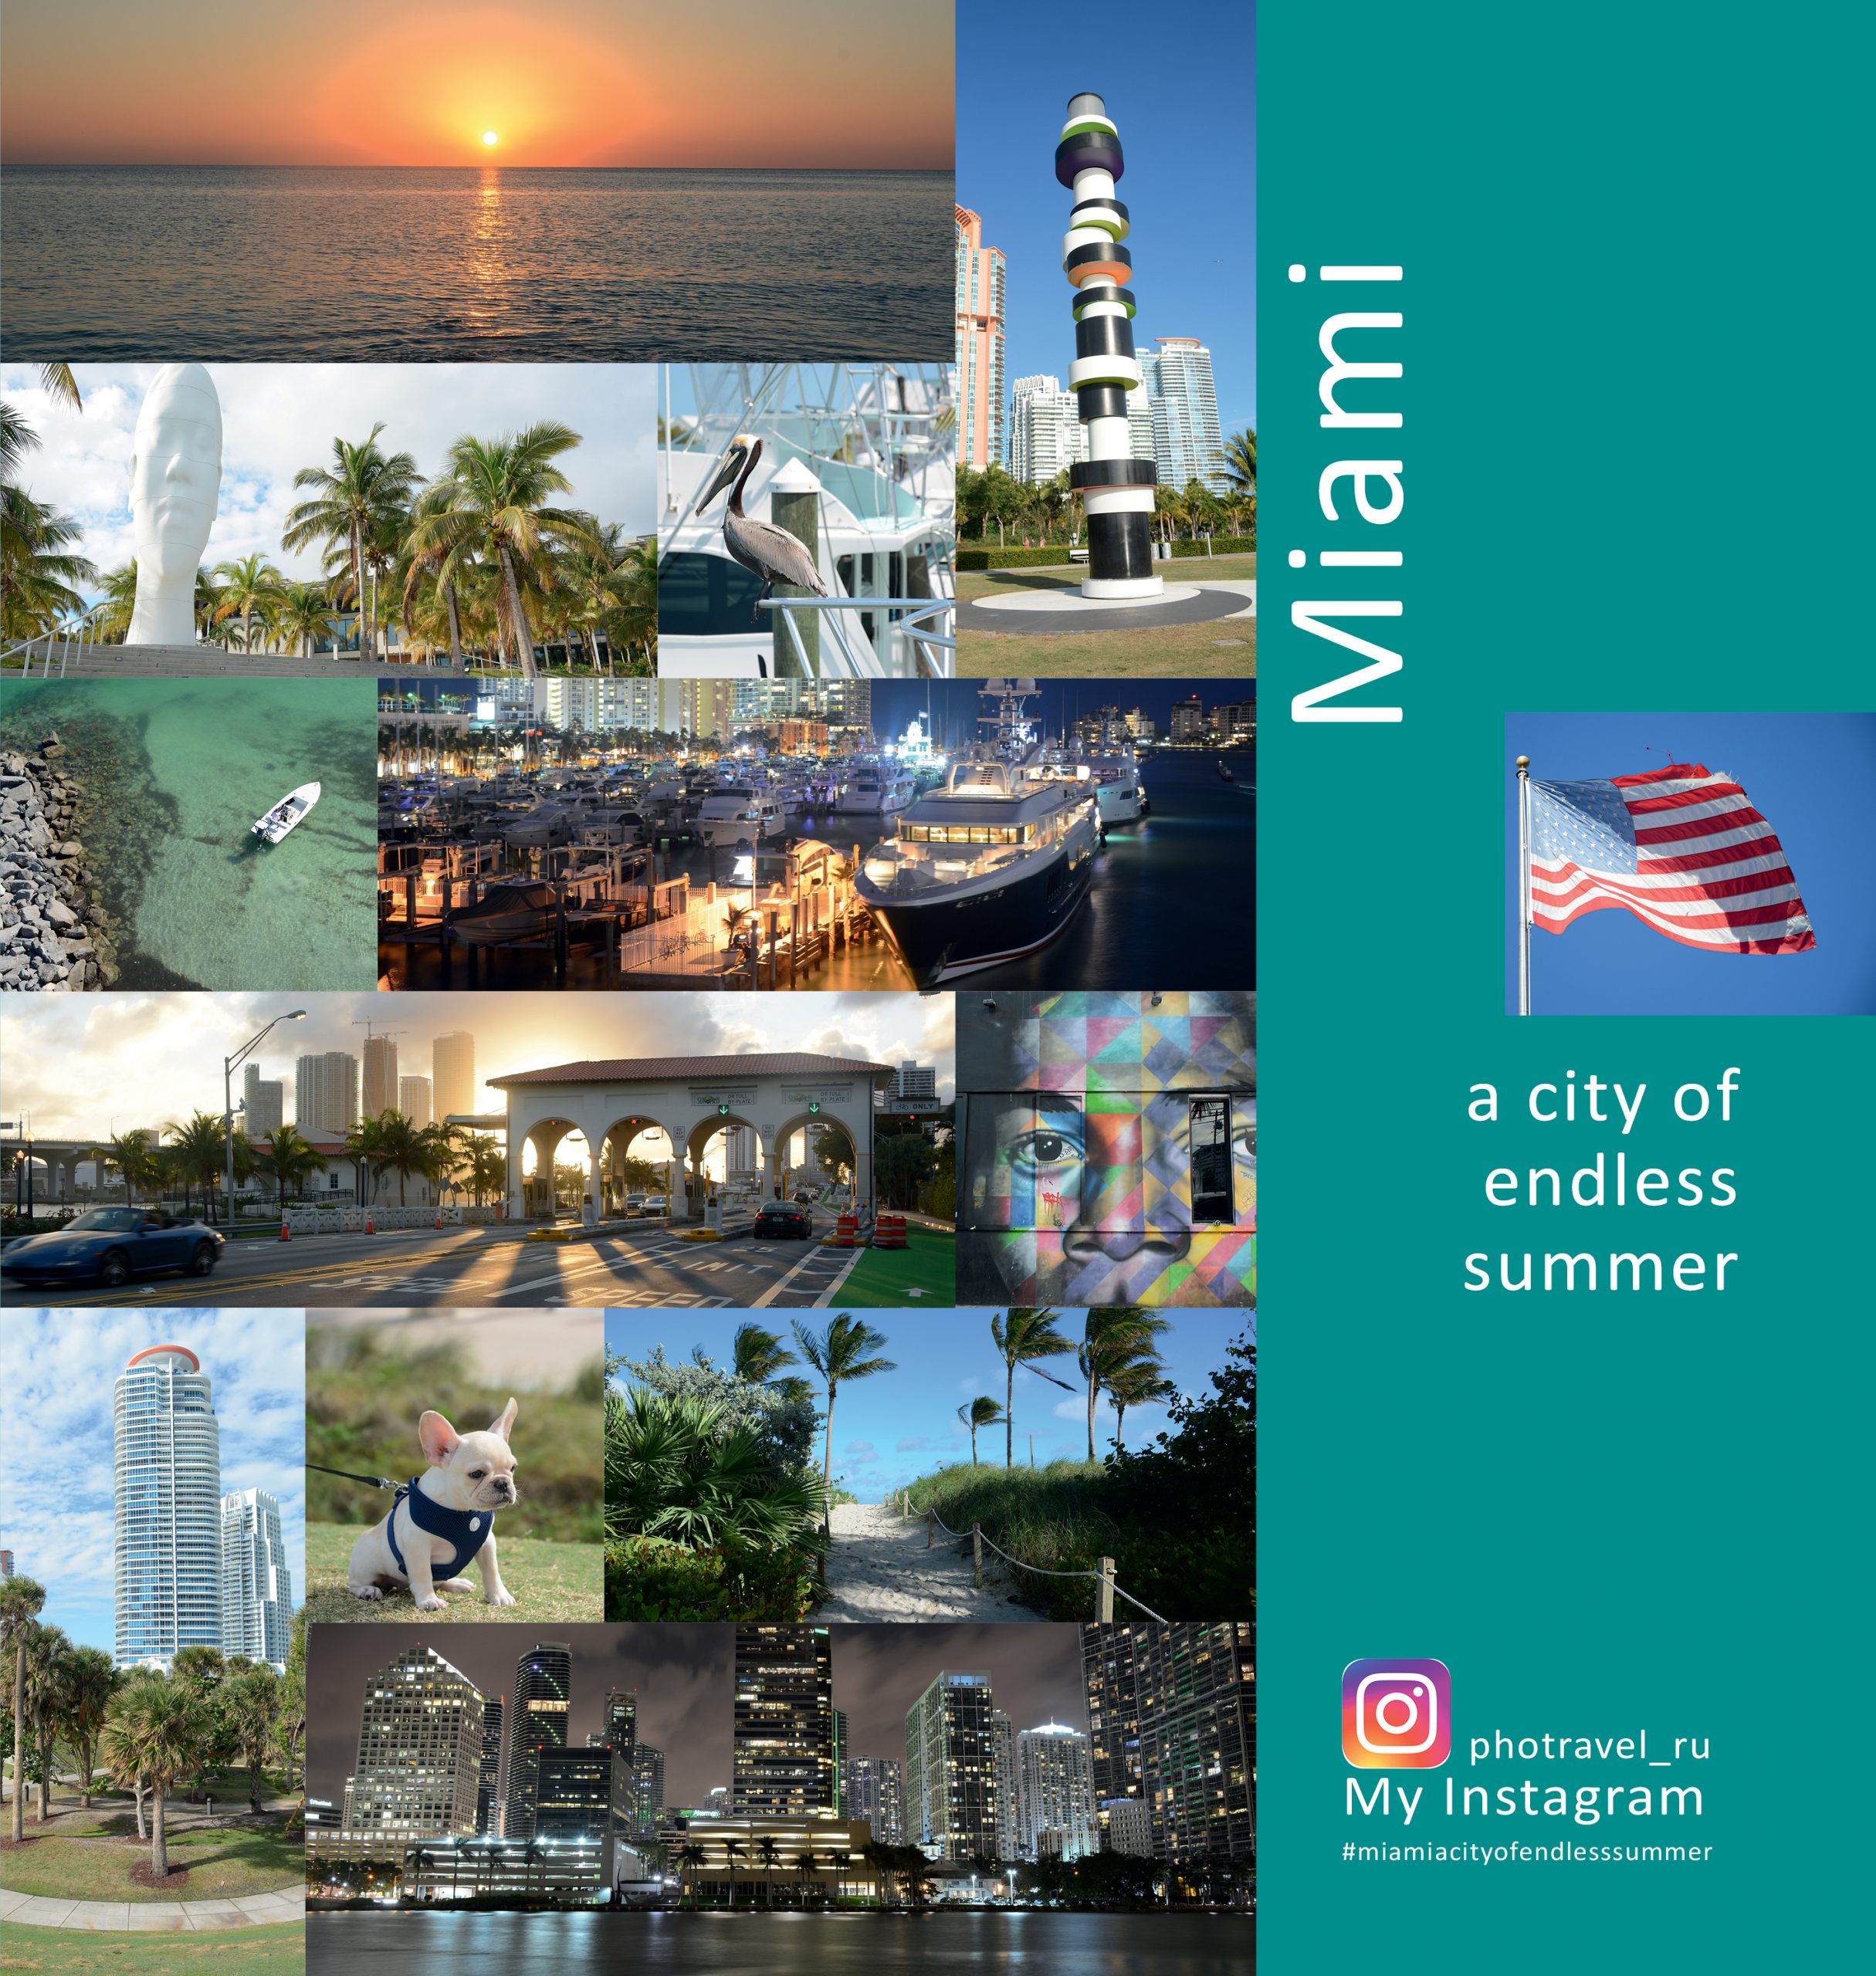 Miami: A City of Endless Summer